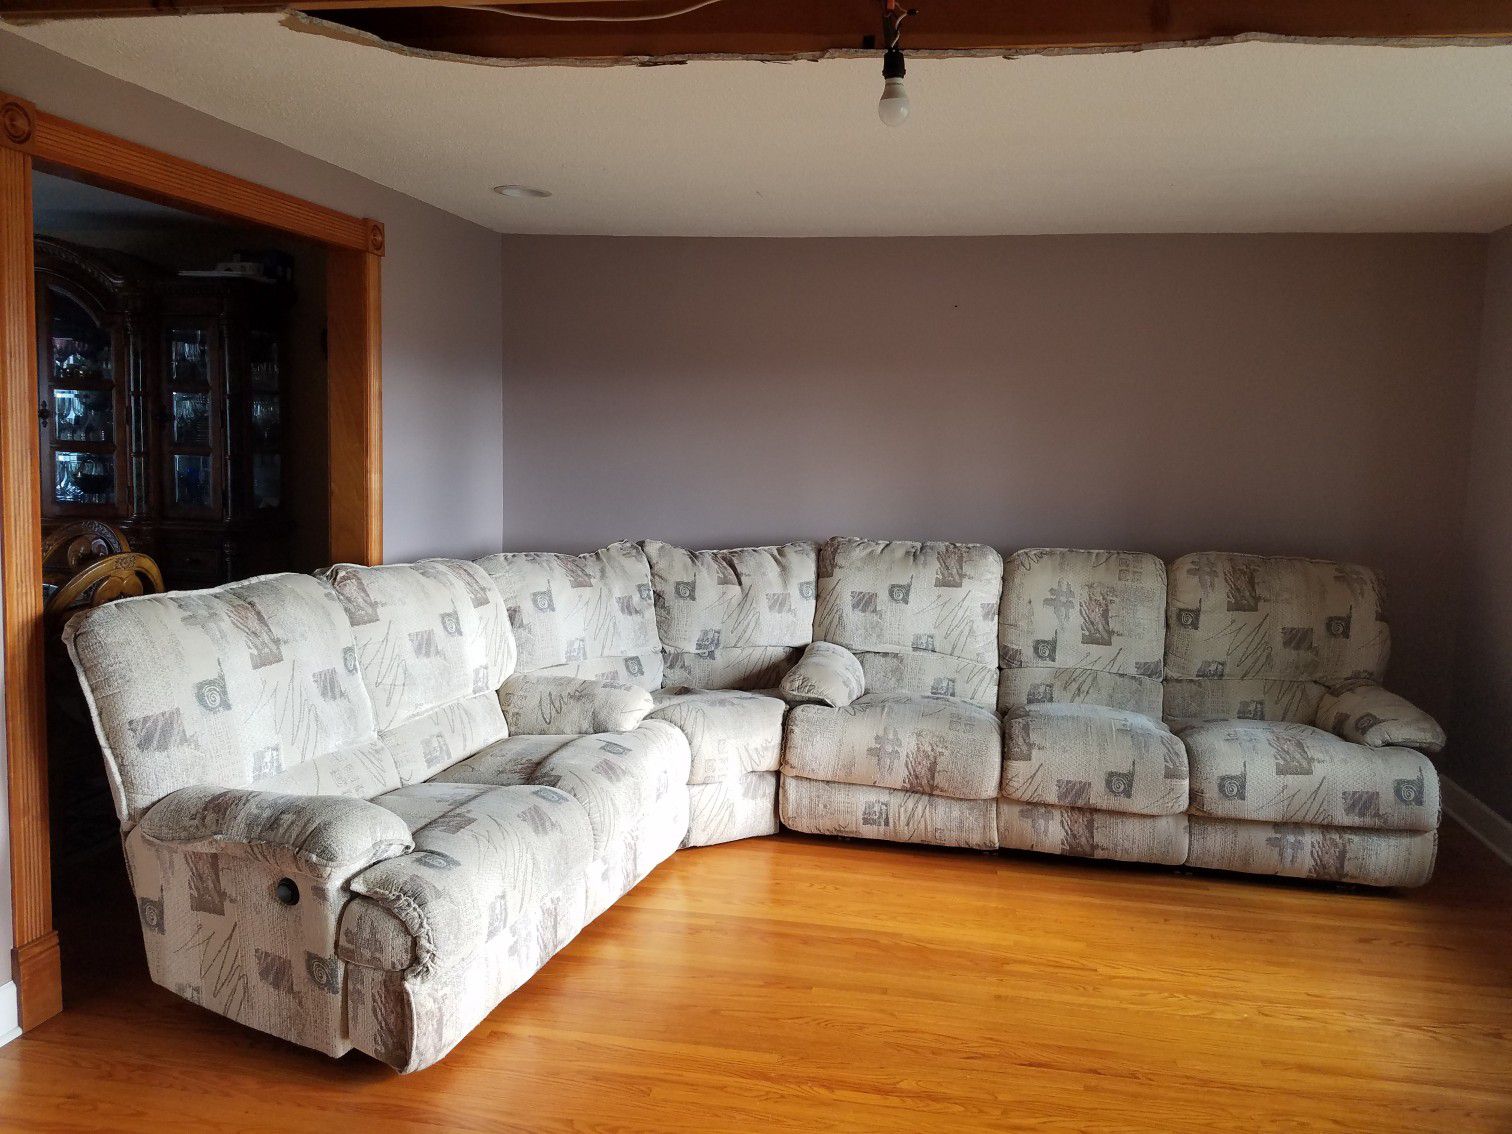 Sectional style couch & recliner